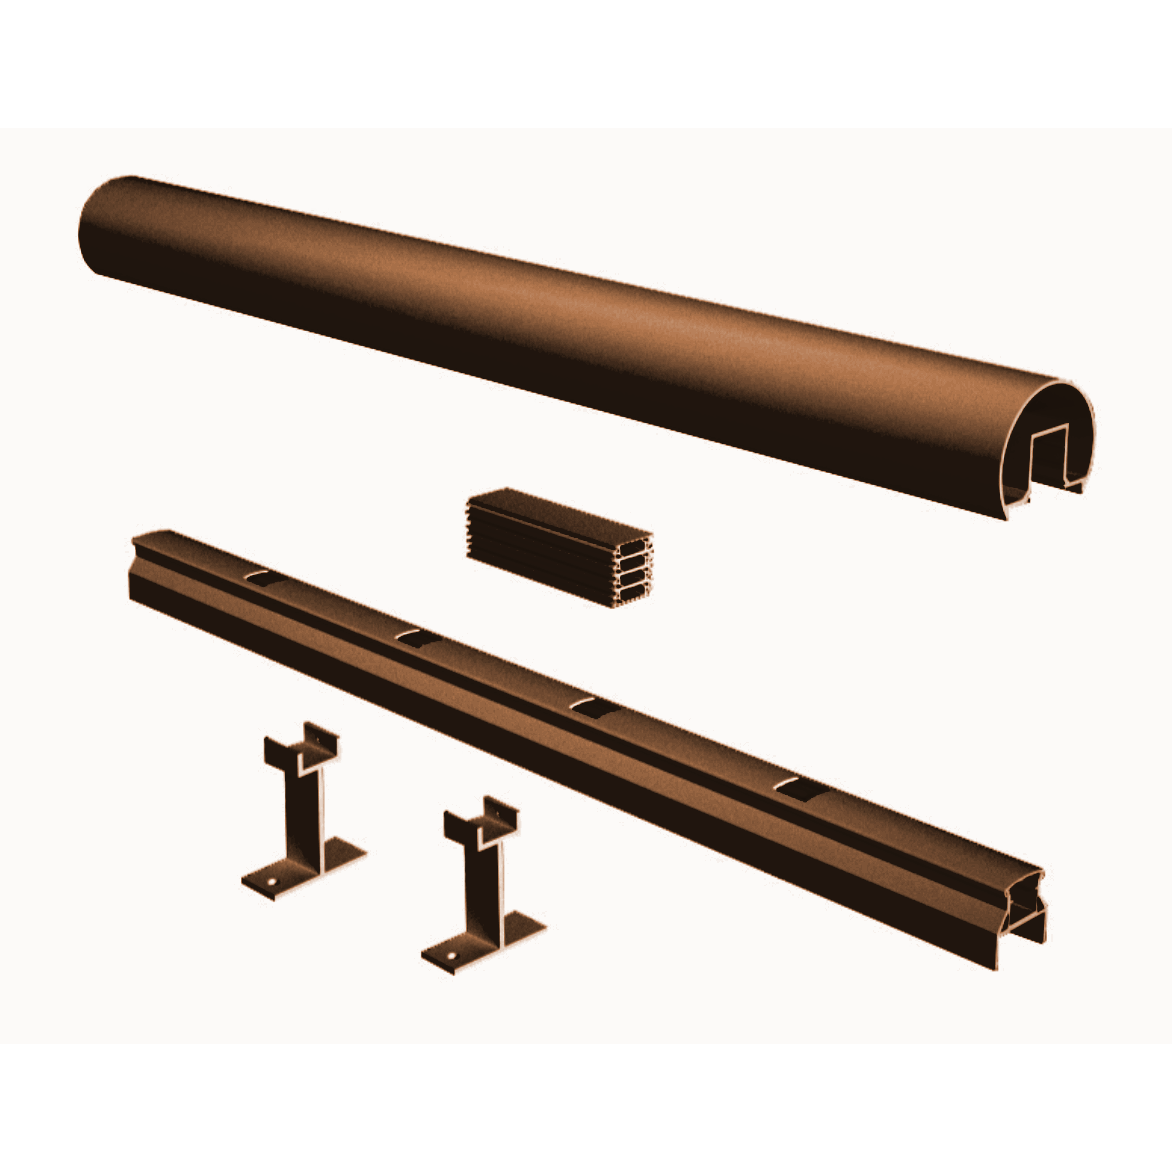 8' Century Top & Bottom Rail for 5/8" Stair Picket, Lakeside Copper